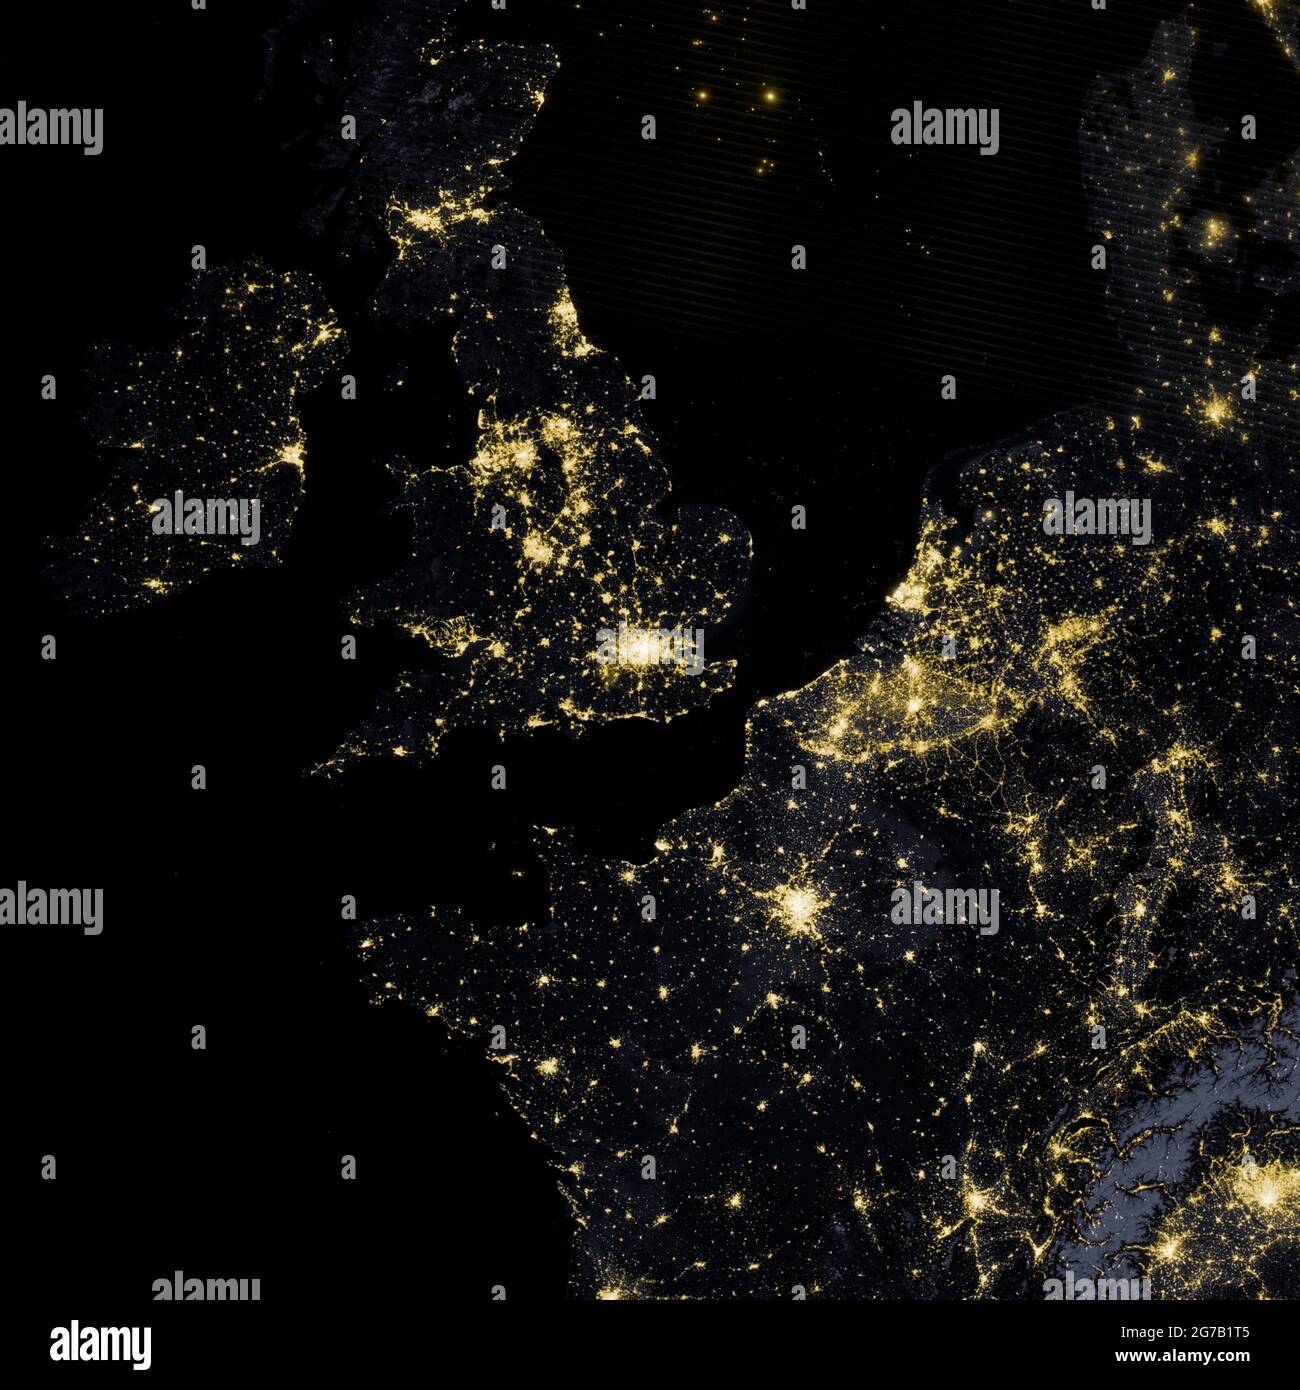 City lights and illuminated highways photographed from space. The UK, Ireland, France and neighbouring countries photographed from Space on the night of 27 March 2012. by the  Suomi National Polar-orbiting Partnership satellite. The image was acquired by the Visible Infrared Imaging Radiometer Suite (VIIRS) on Suomi NPP.  A unique, optimised and digitally enhanced version of an NASA image / credit NASA Stock Photo